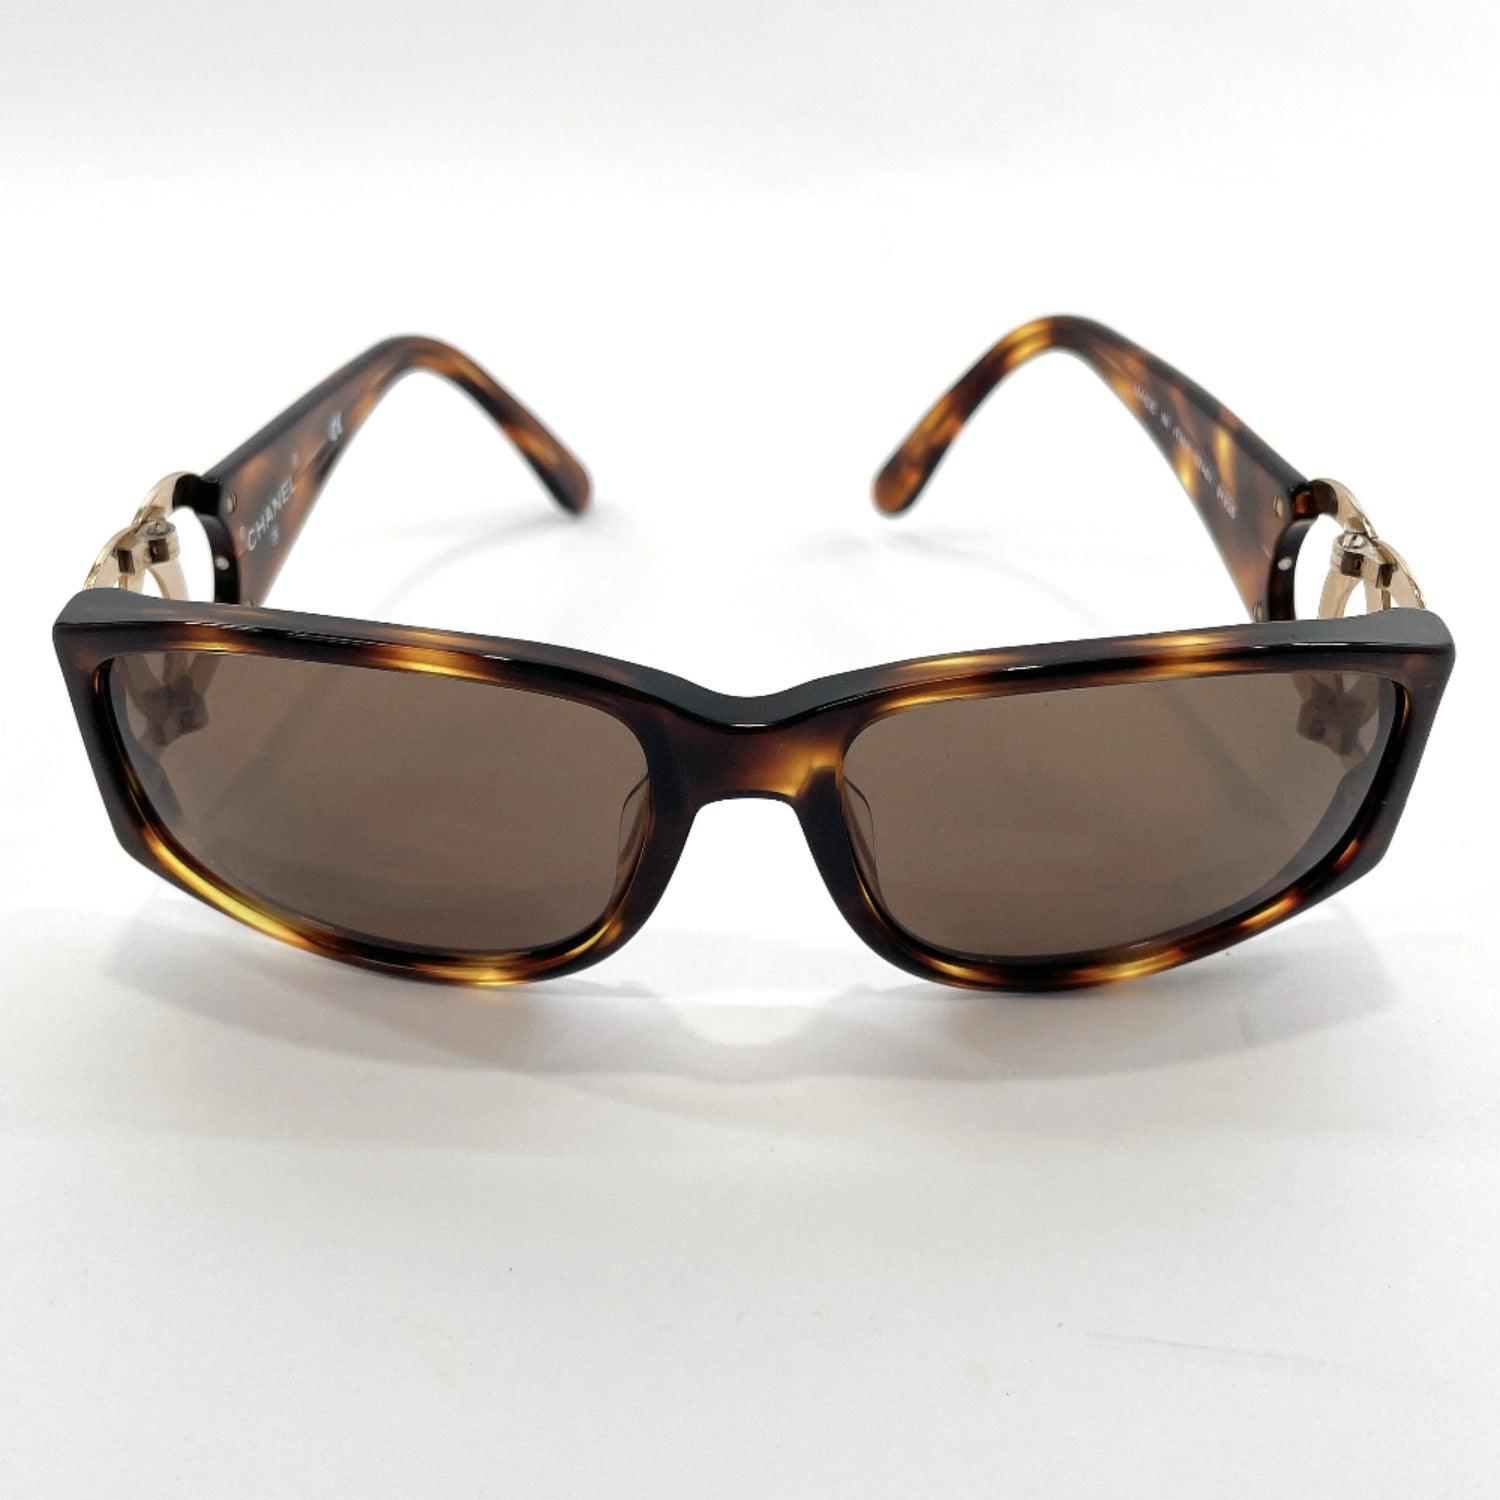 CHANEL sunglasses 01450 91235 COCO Mark Synthetic resin Brown